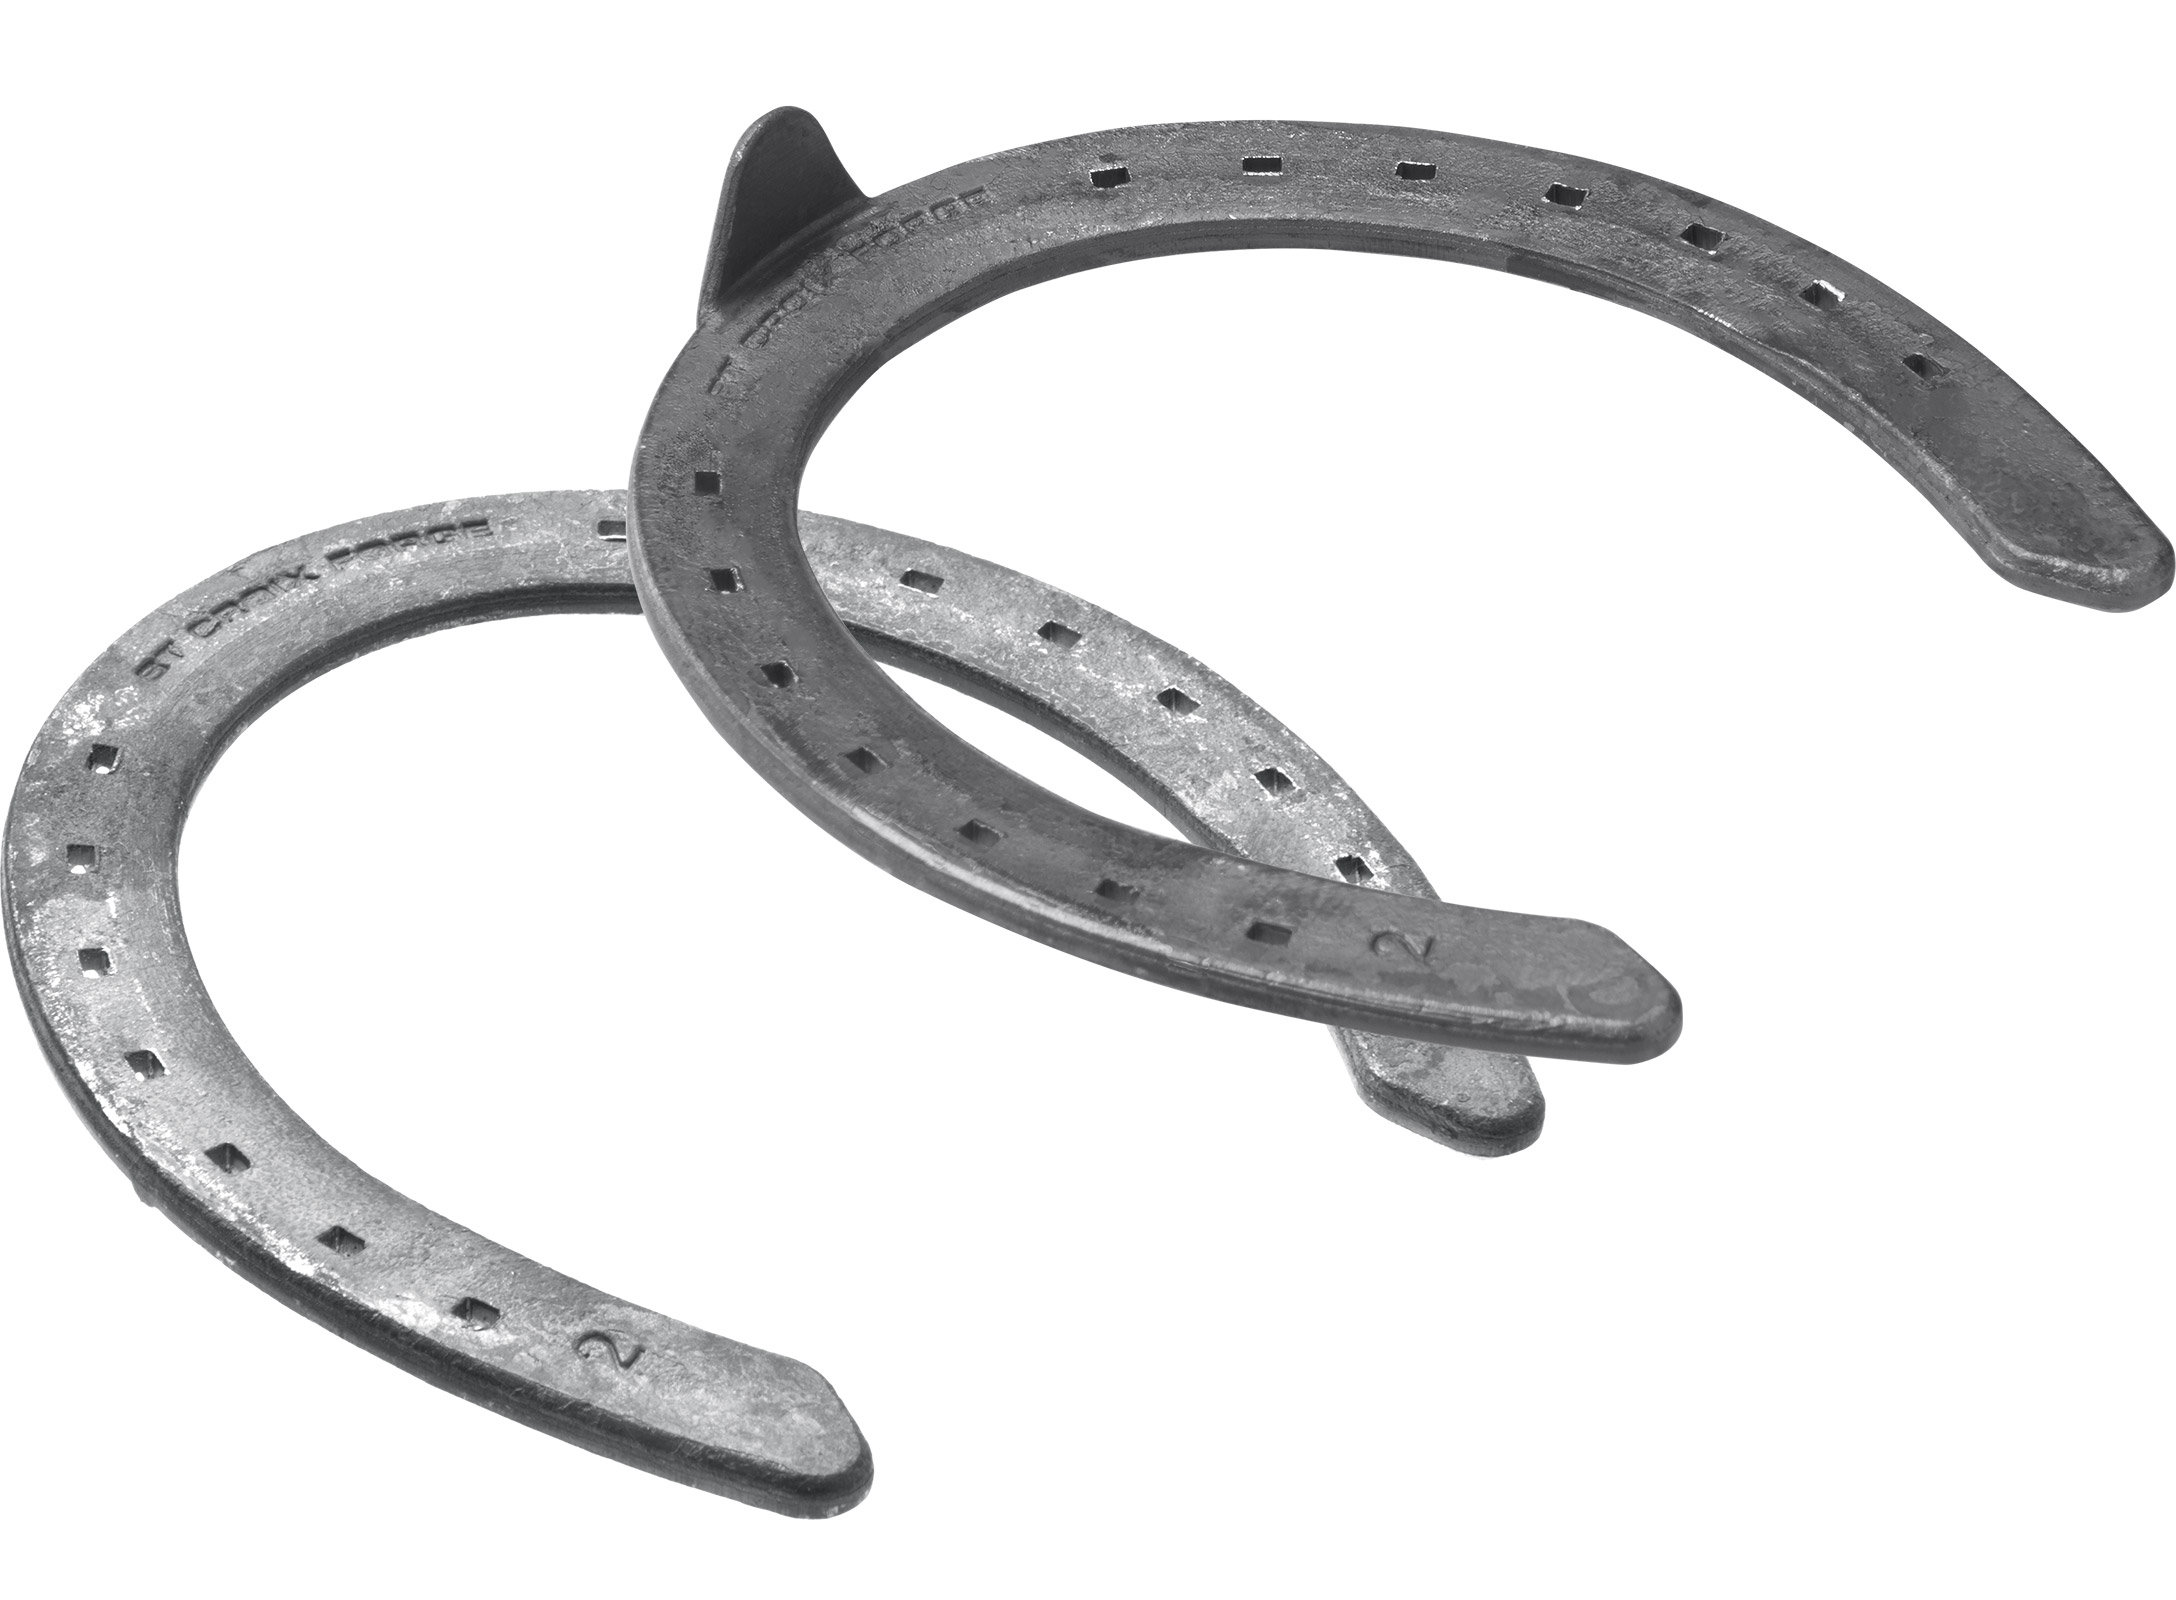 St.Croix Rapid Halfround horseshoes, hind unclipped and toe clip, hoof side view